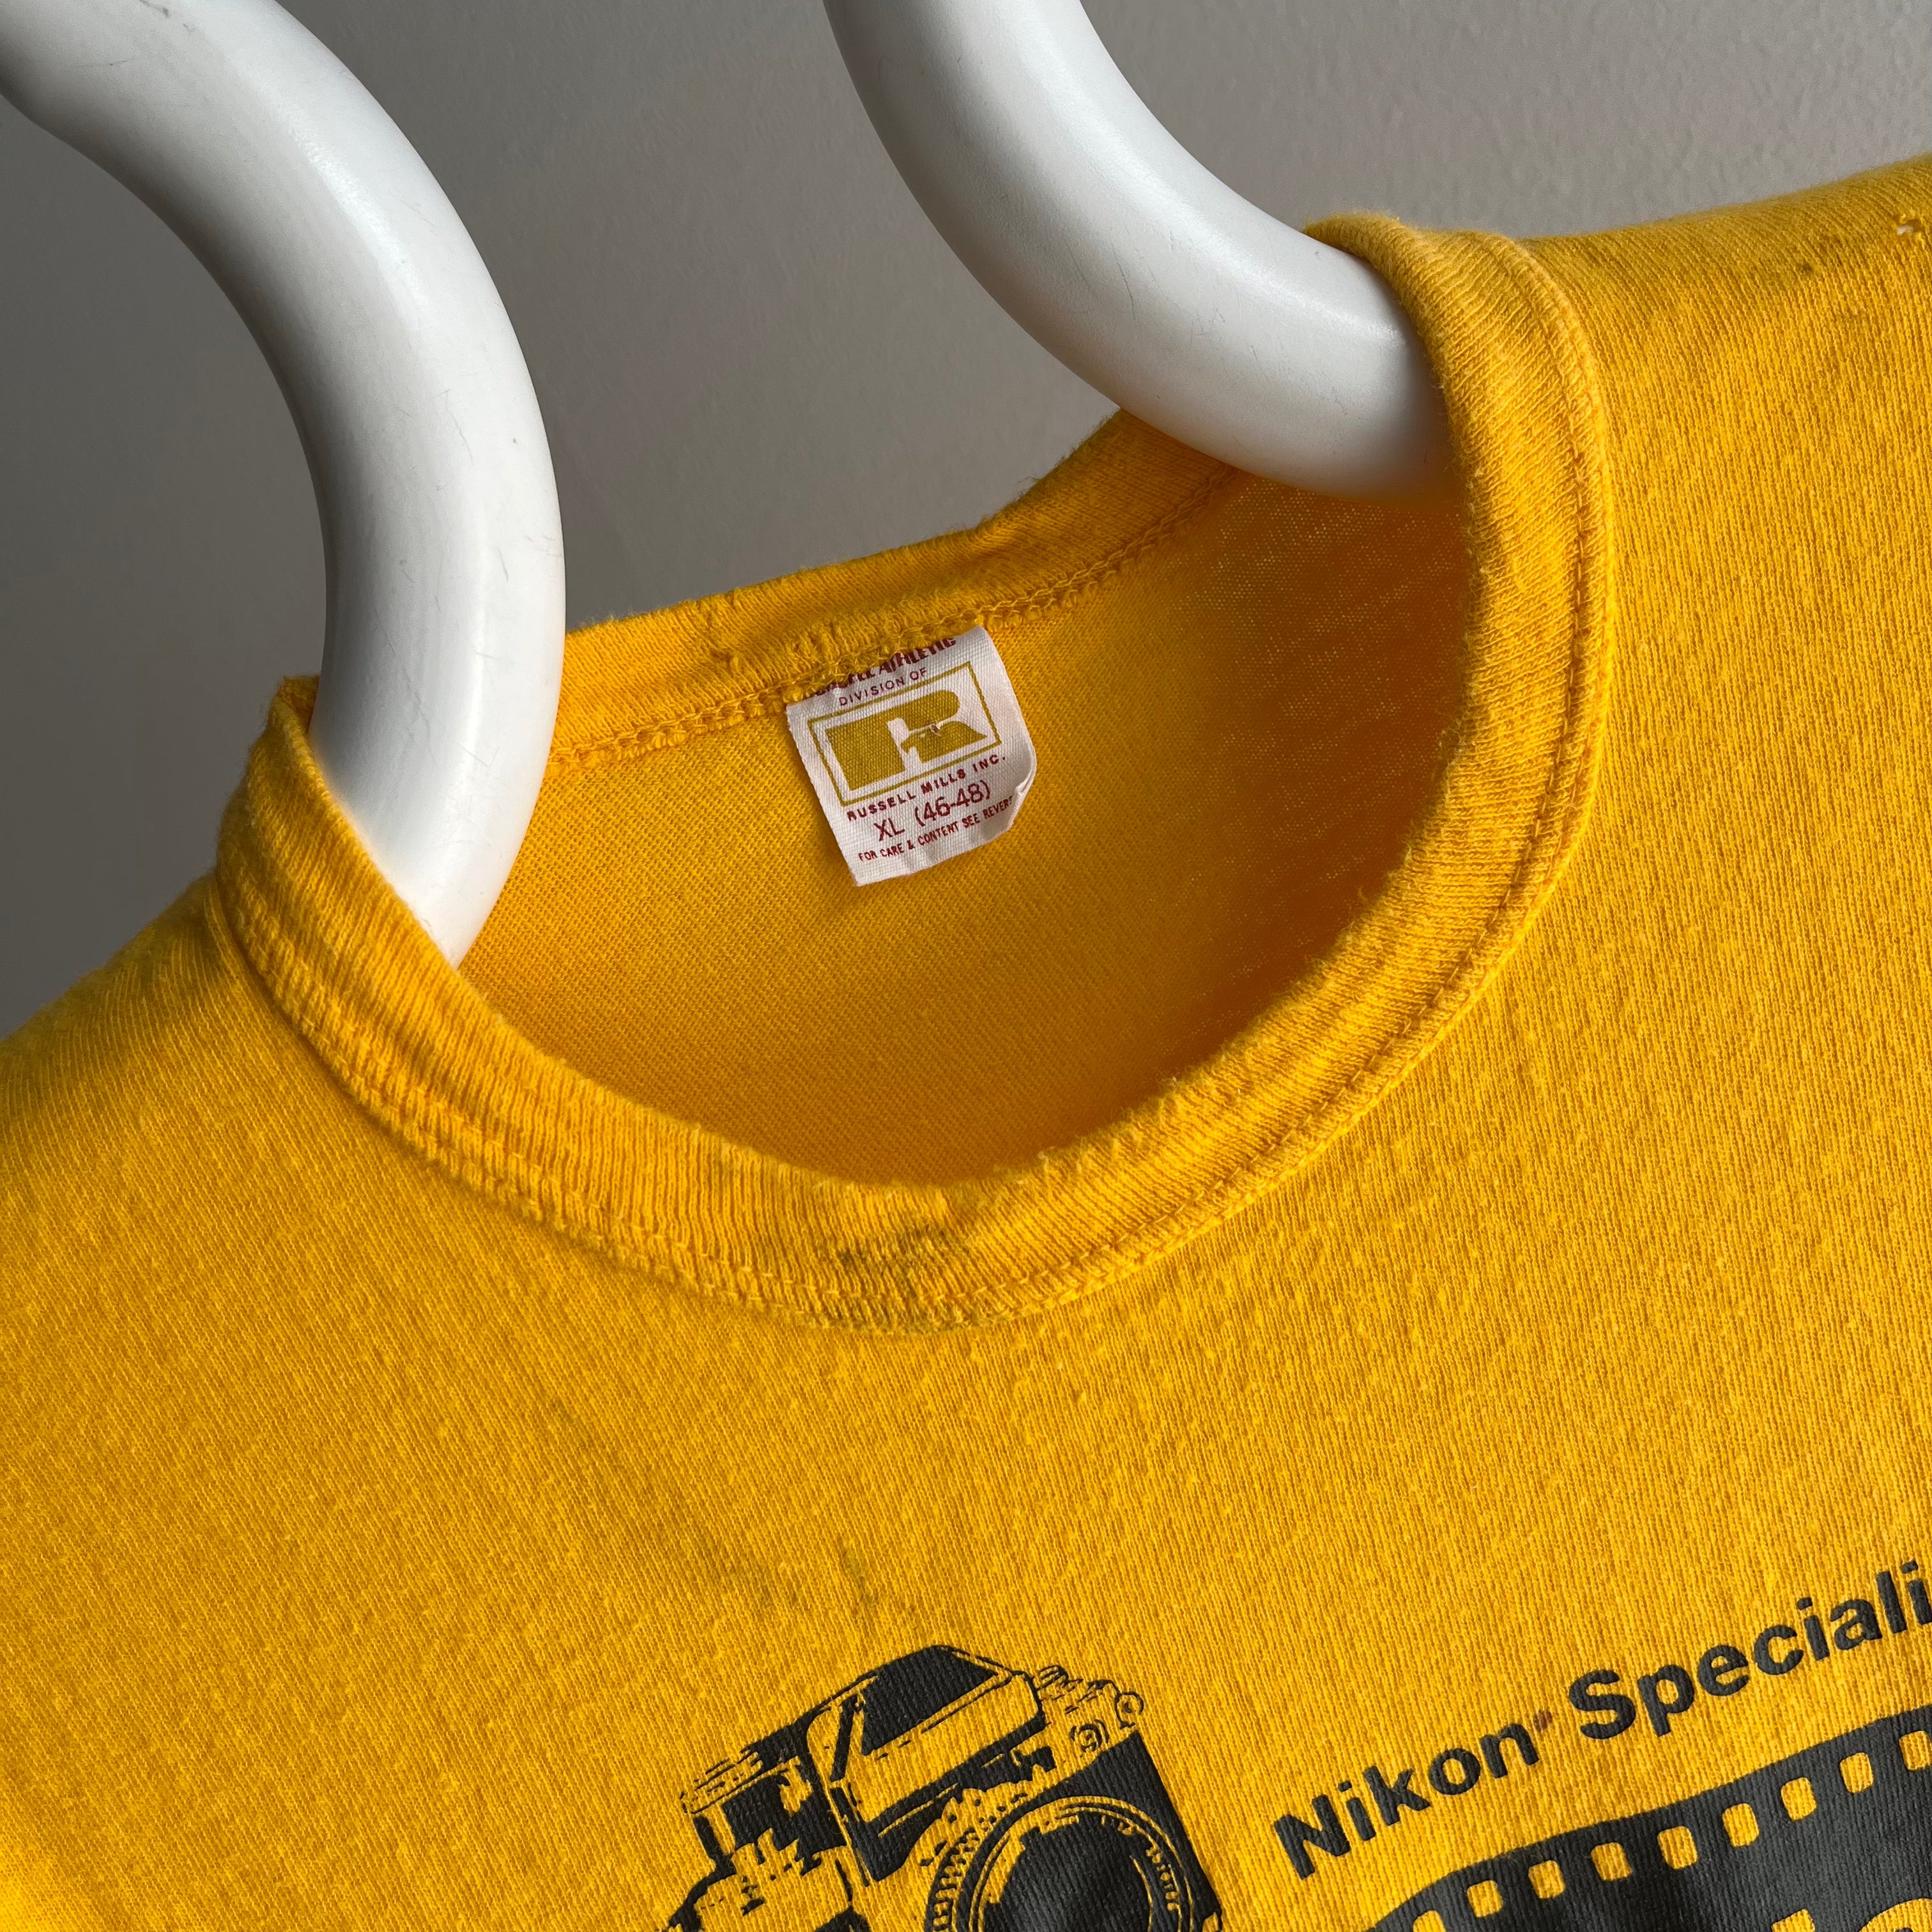 1970s Nikon Specialist Photo Alliance Cotton Rolled Neck T-Shirt by Russell Brand!!